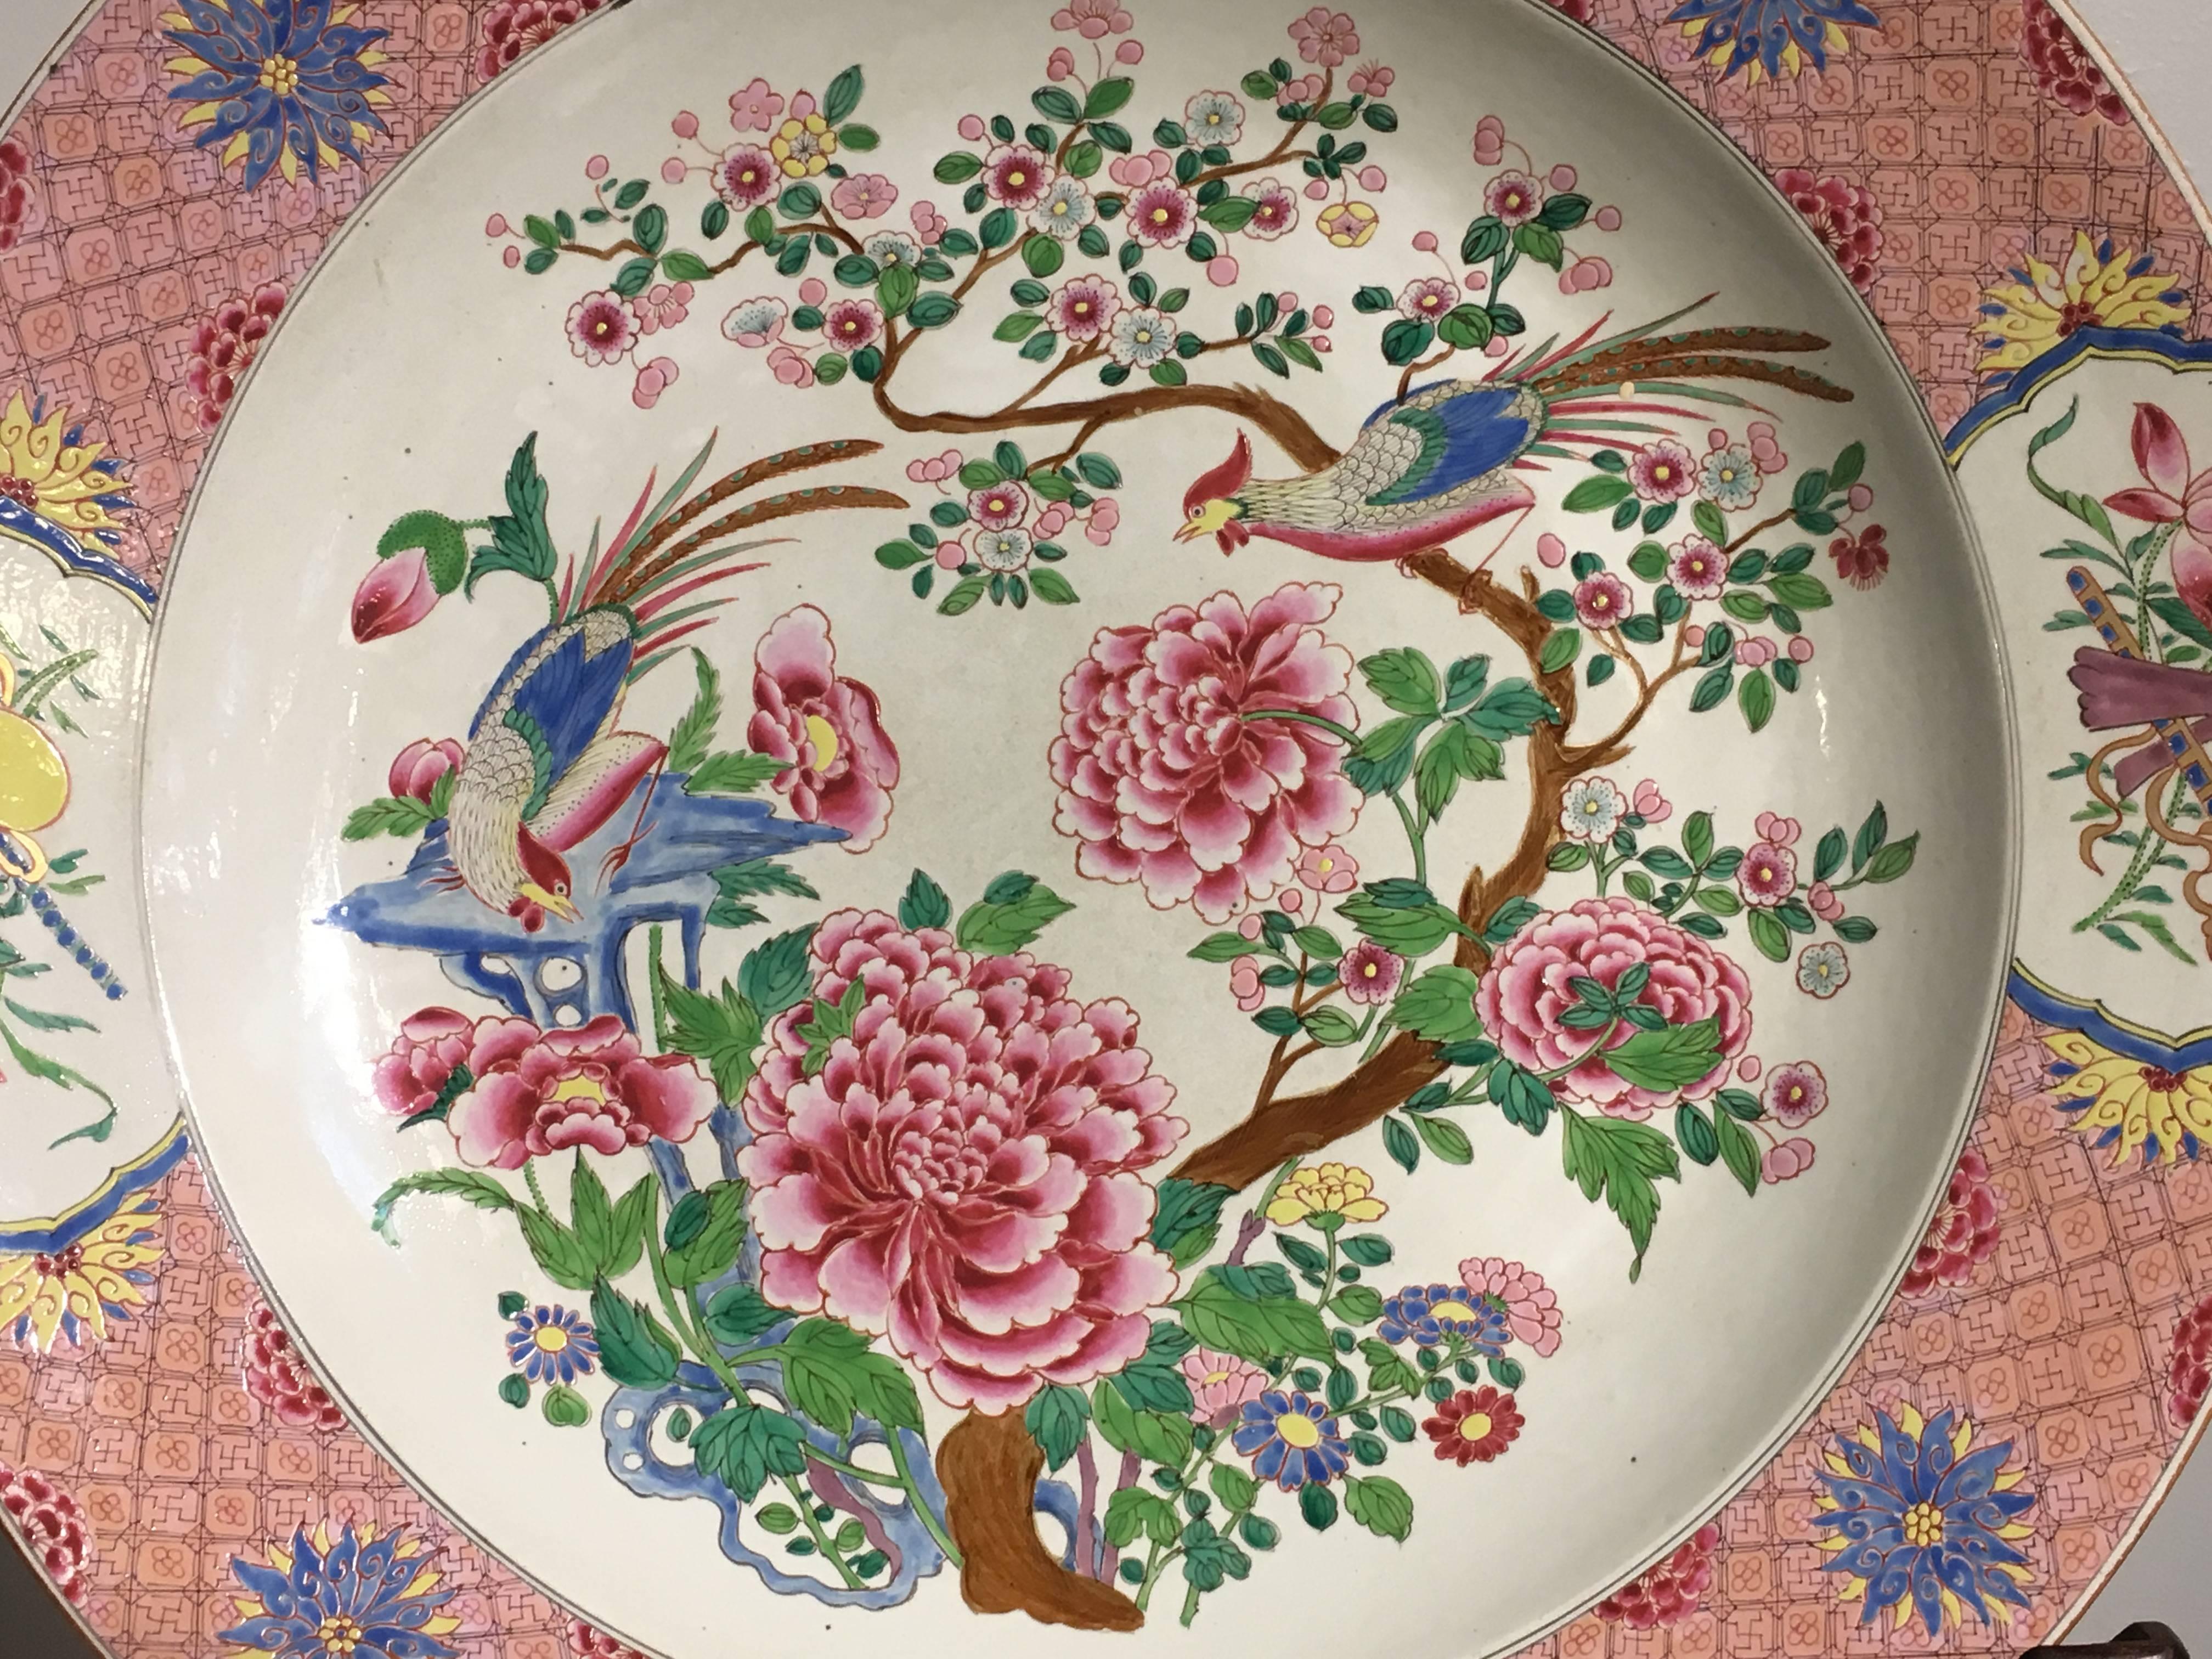 A massive famille rose enameled Chinese export style charger, Continental, probably French, circa 1900.

The large dish painted in vibrant famille rose enamels in an overall pink tone, with a central design of a pair of long tailed birds perched